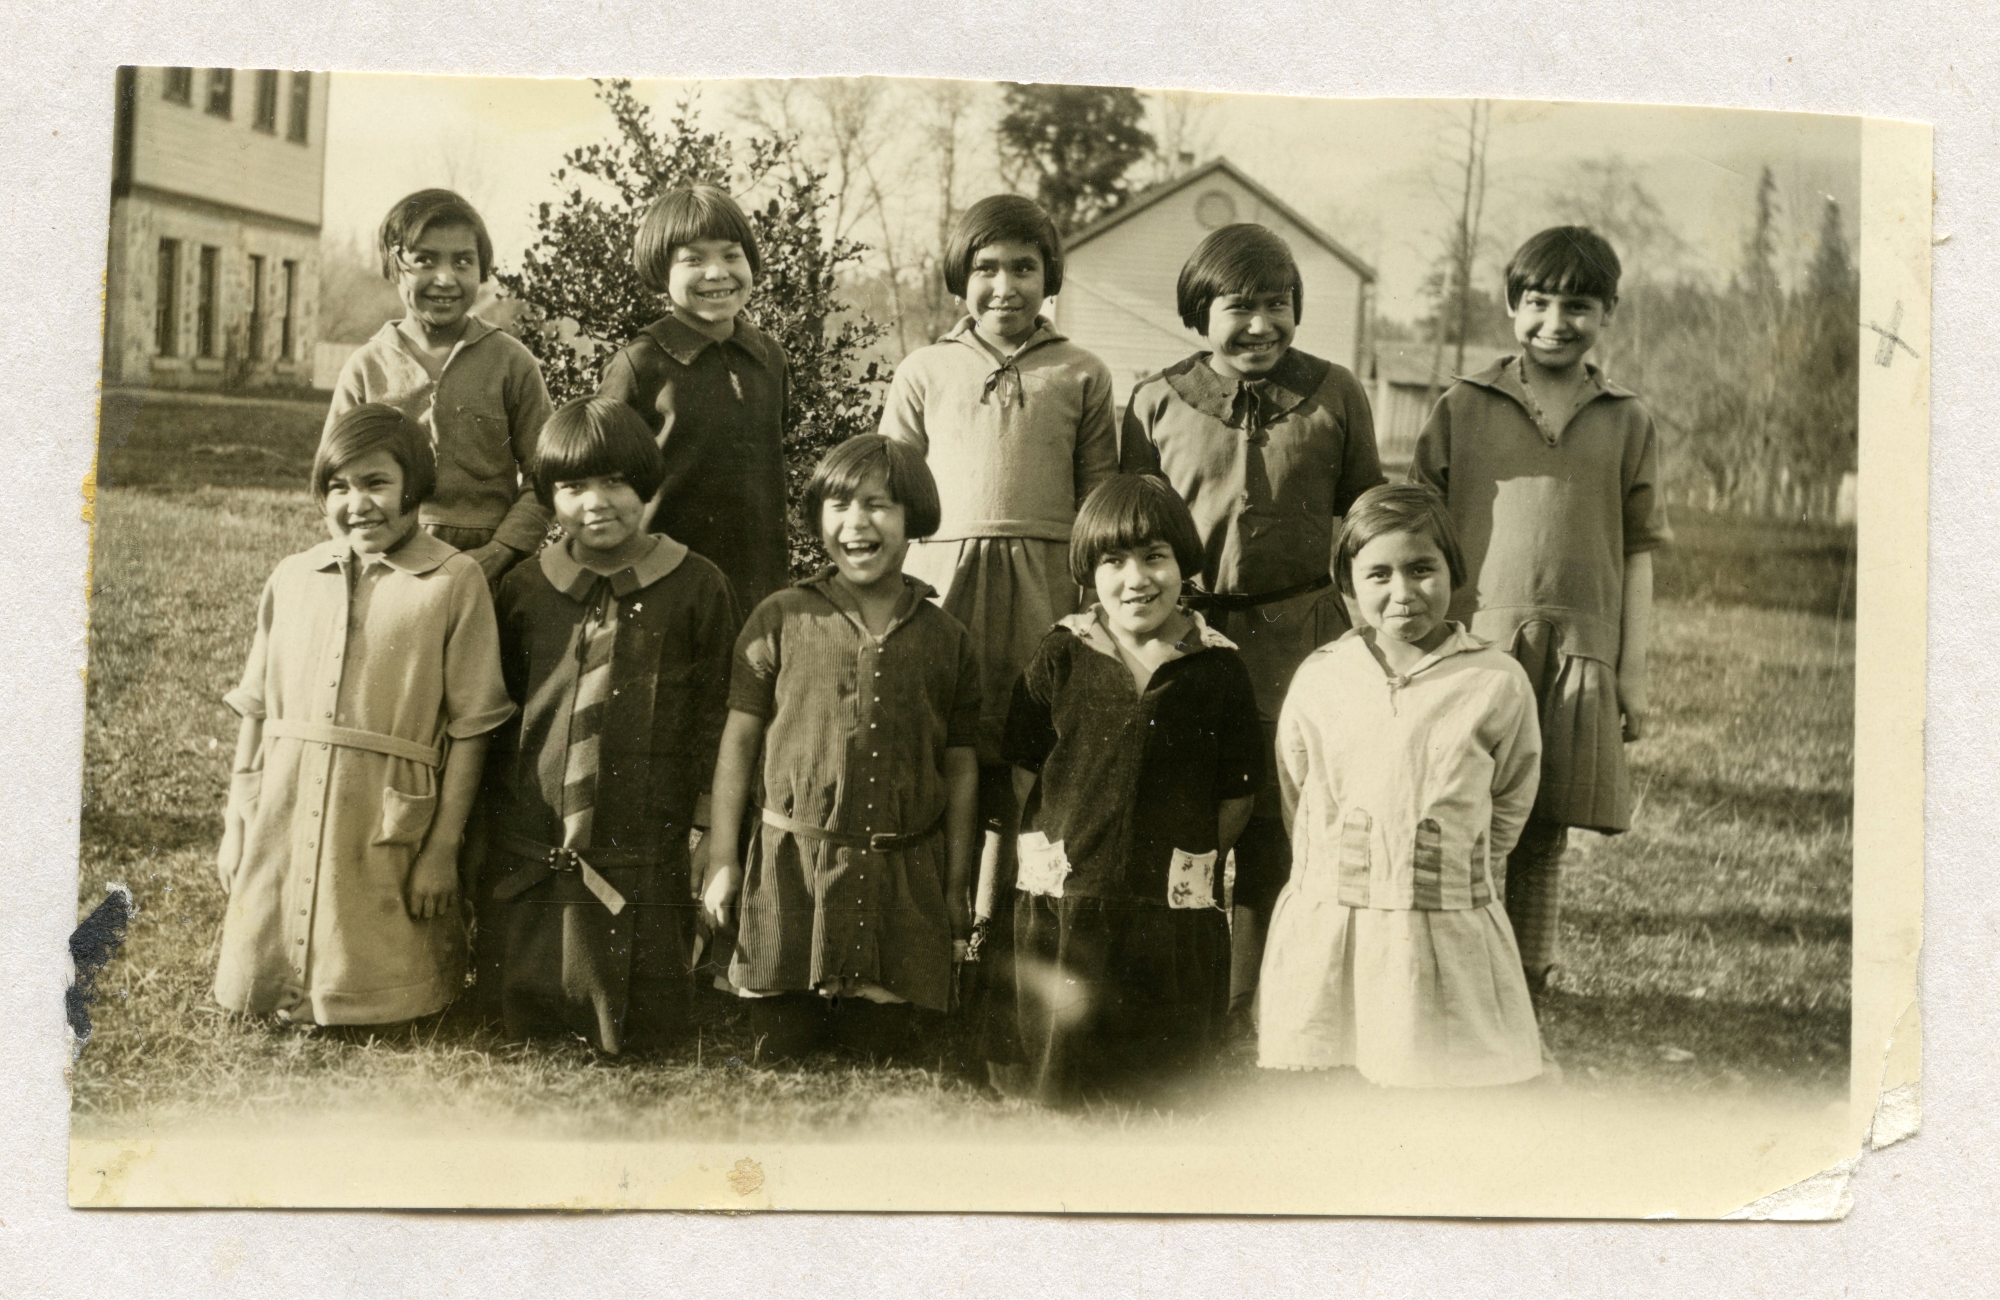 Ten girls, about nine years old, smile at the camera in a black-and-white photo. Five are kneeling and another five stand behind them. They all have similar basic haircuts.